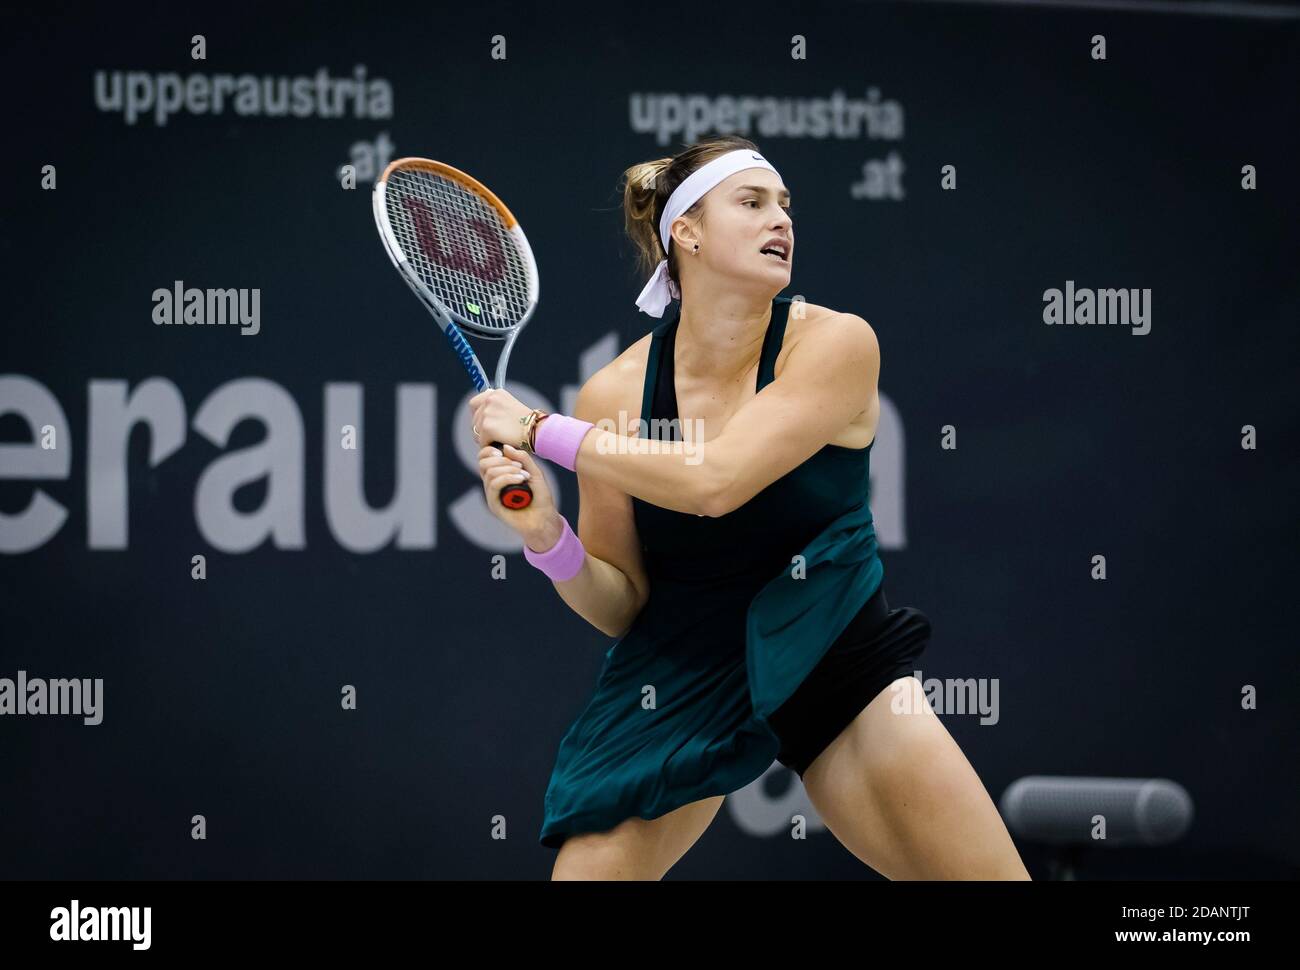 Aryna Sabalenka of Belarus in action against Oceane Dodin of France during the quarter-final at the 2020 Upper Austria Ladies Linz / LM Stock Photo